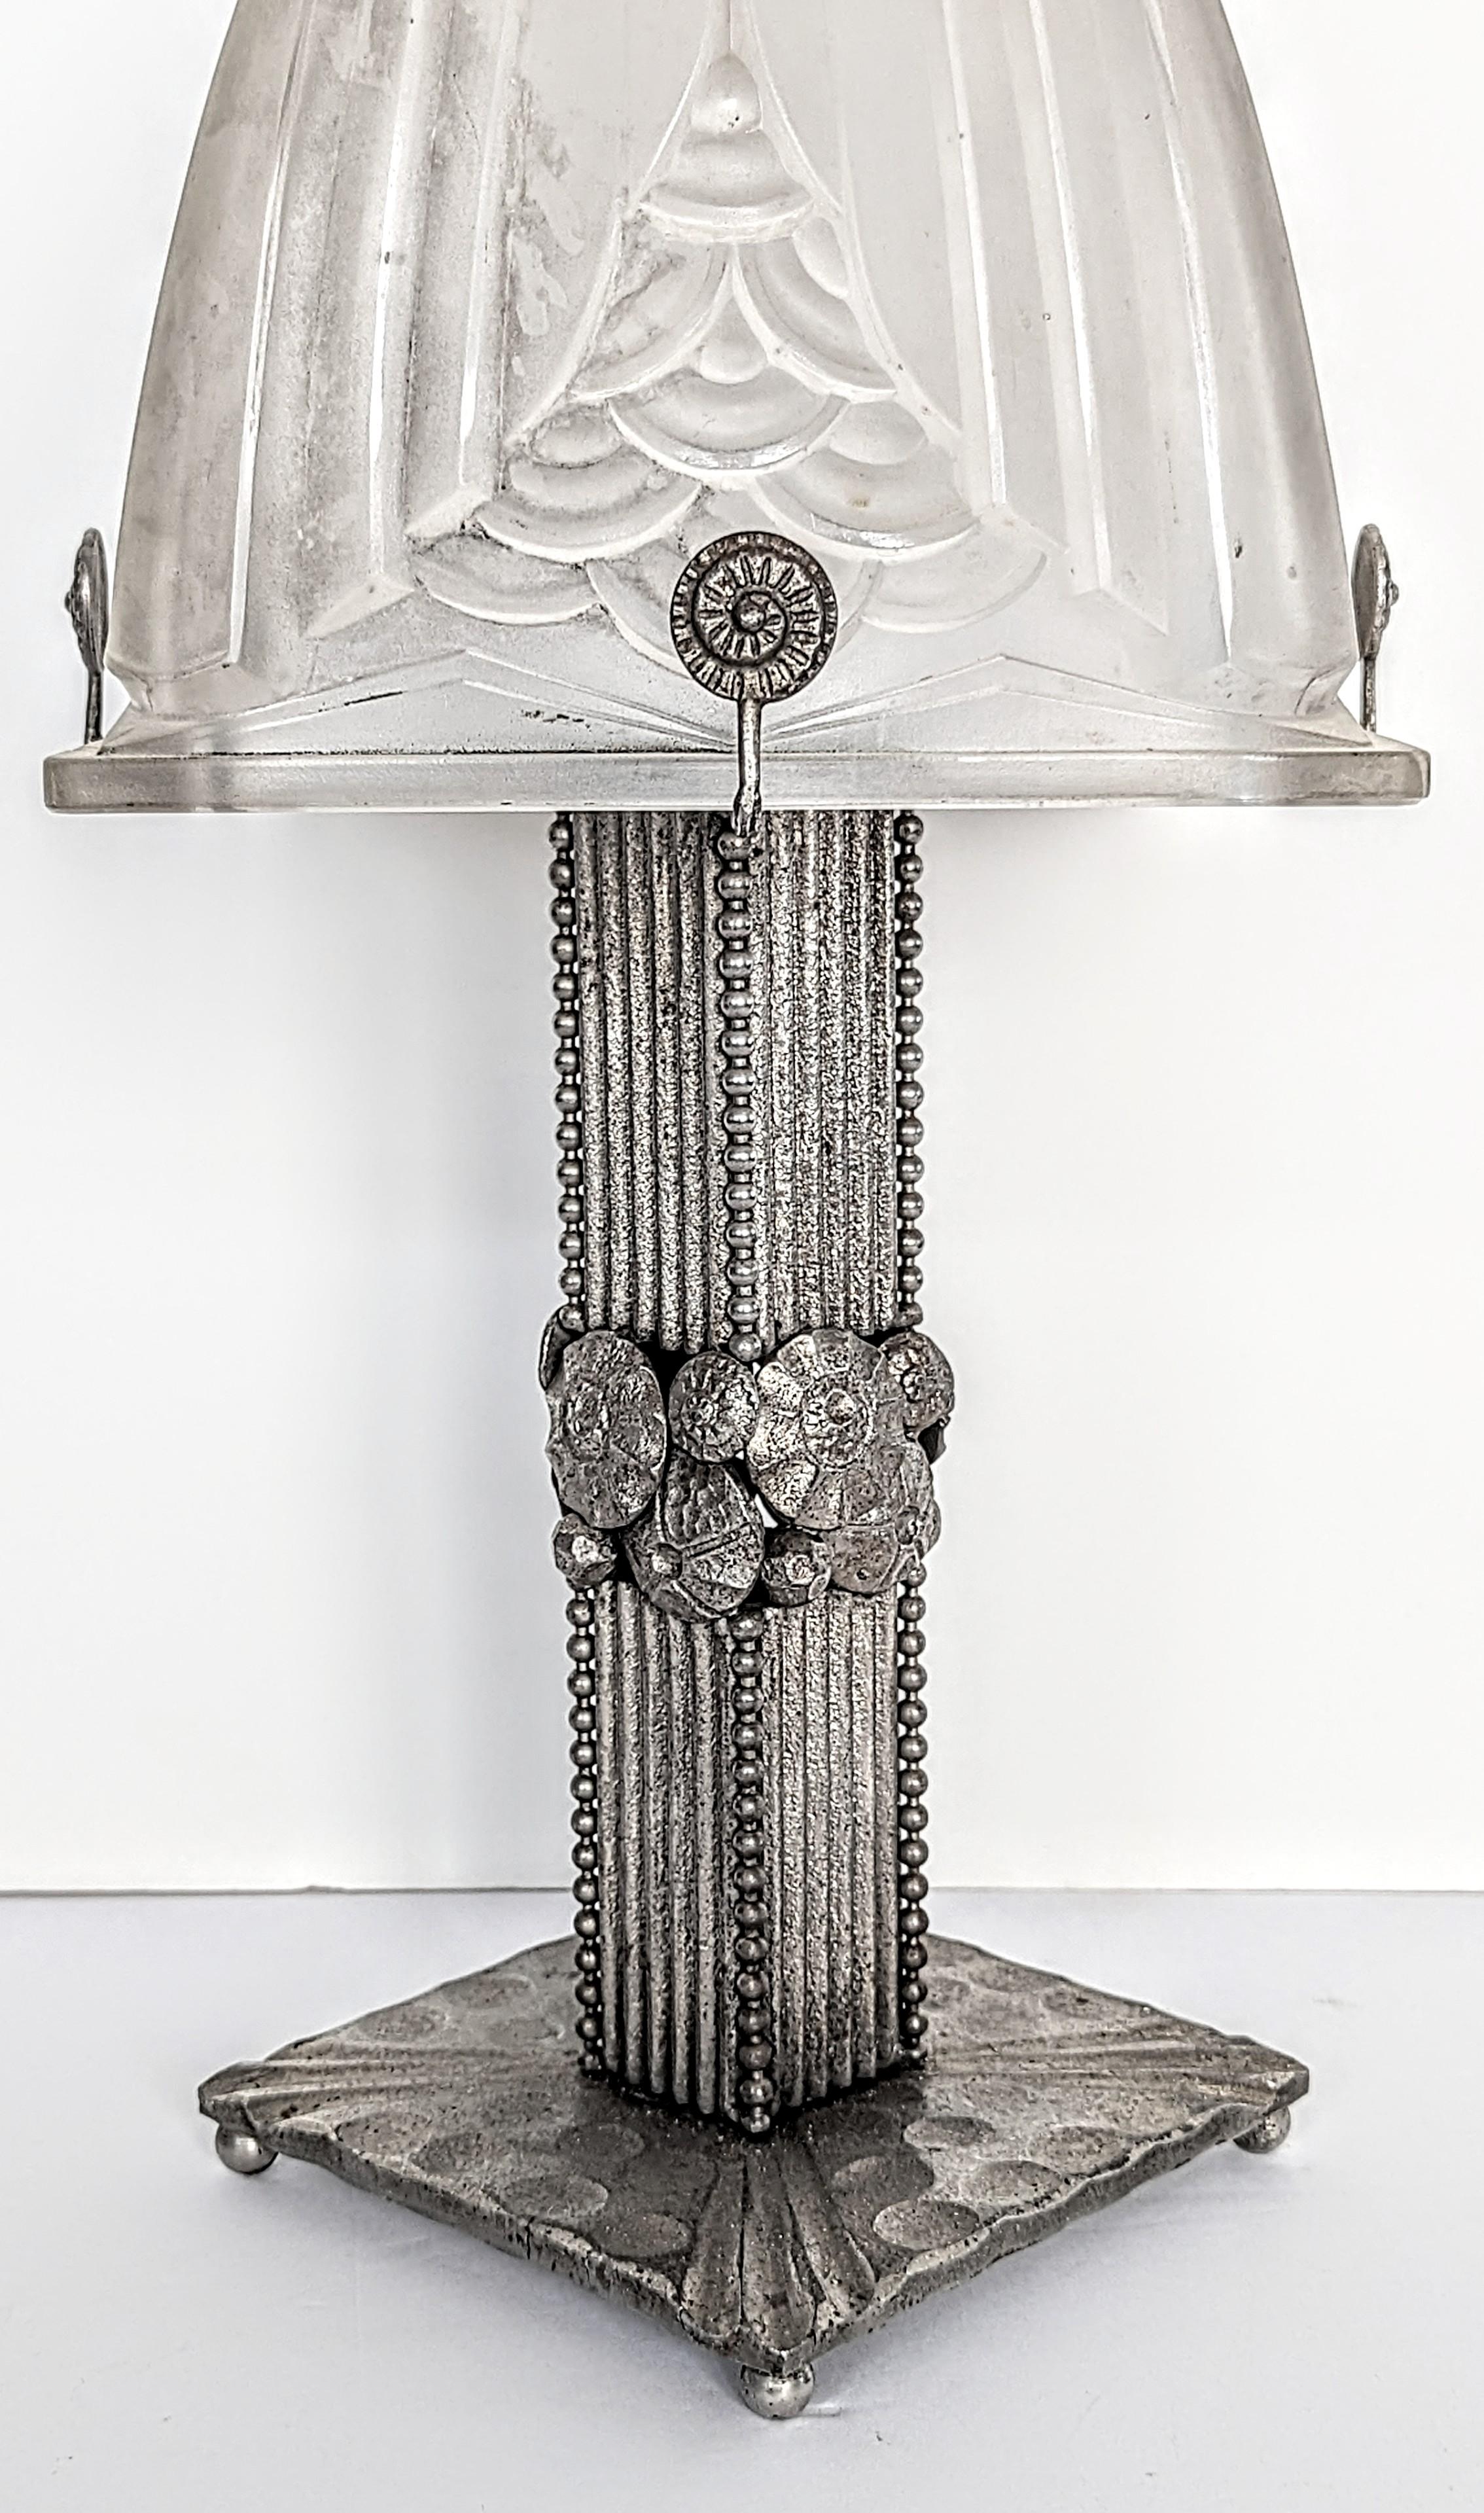 A rare French Art Deco hand-forged wrought iron table lamp embracing a glass shade Signed by the French artist Schneider in great condition. Decorated in stylized geometric floral motifs. Rewired to U.S. standards which accommodate one household